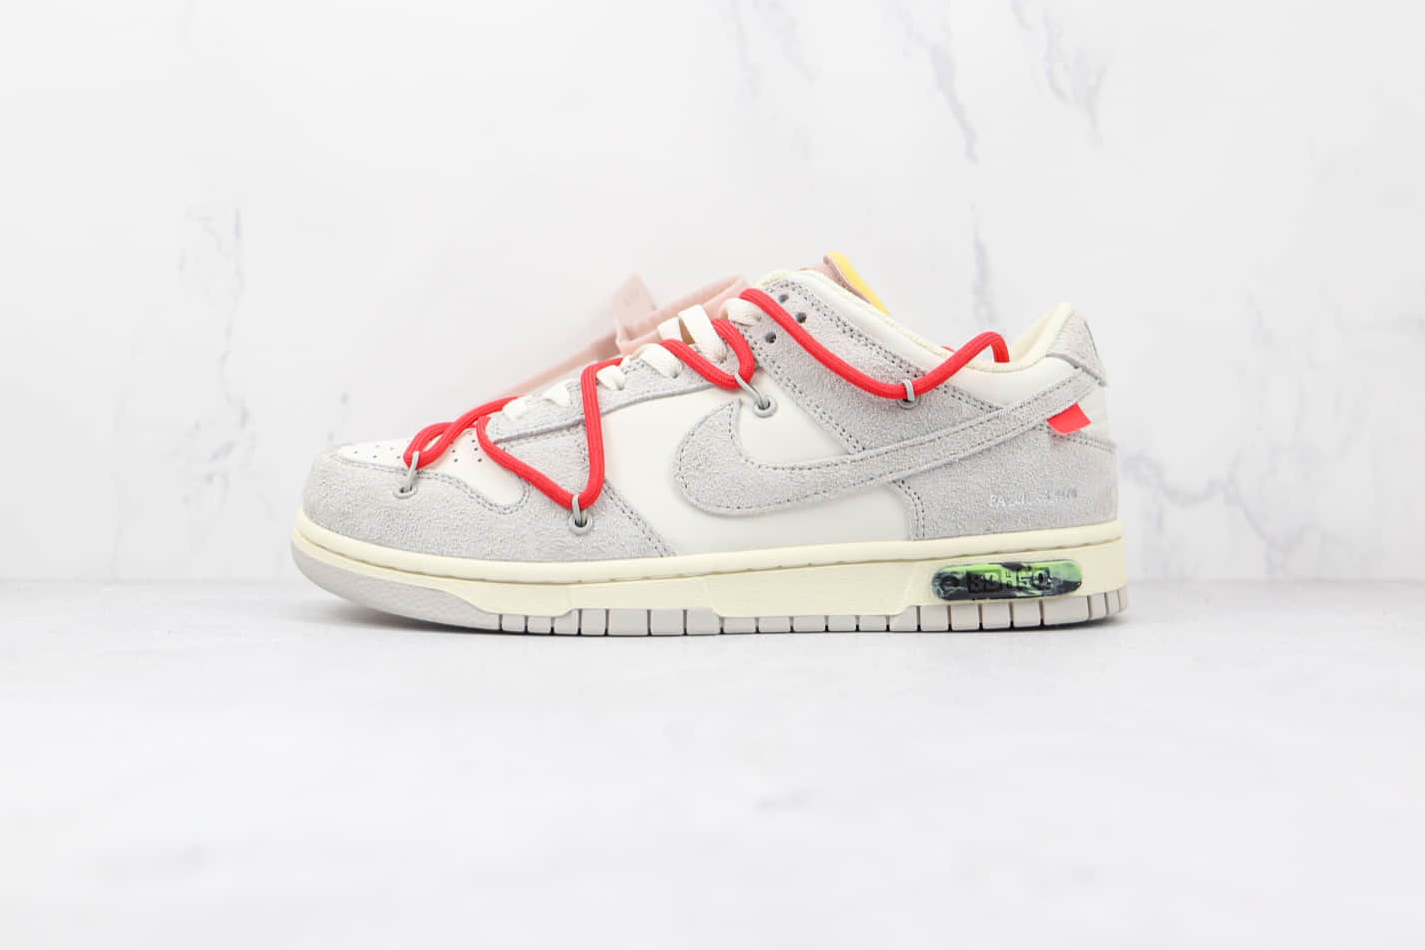 Nike Off-White x Dunk Low 'Lot 33 of 50' DJ0950-118: Limited Edition Collaborative Sneakers